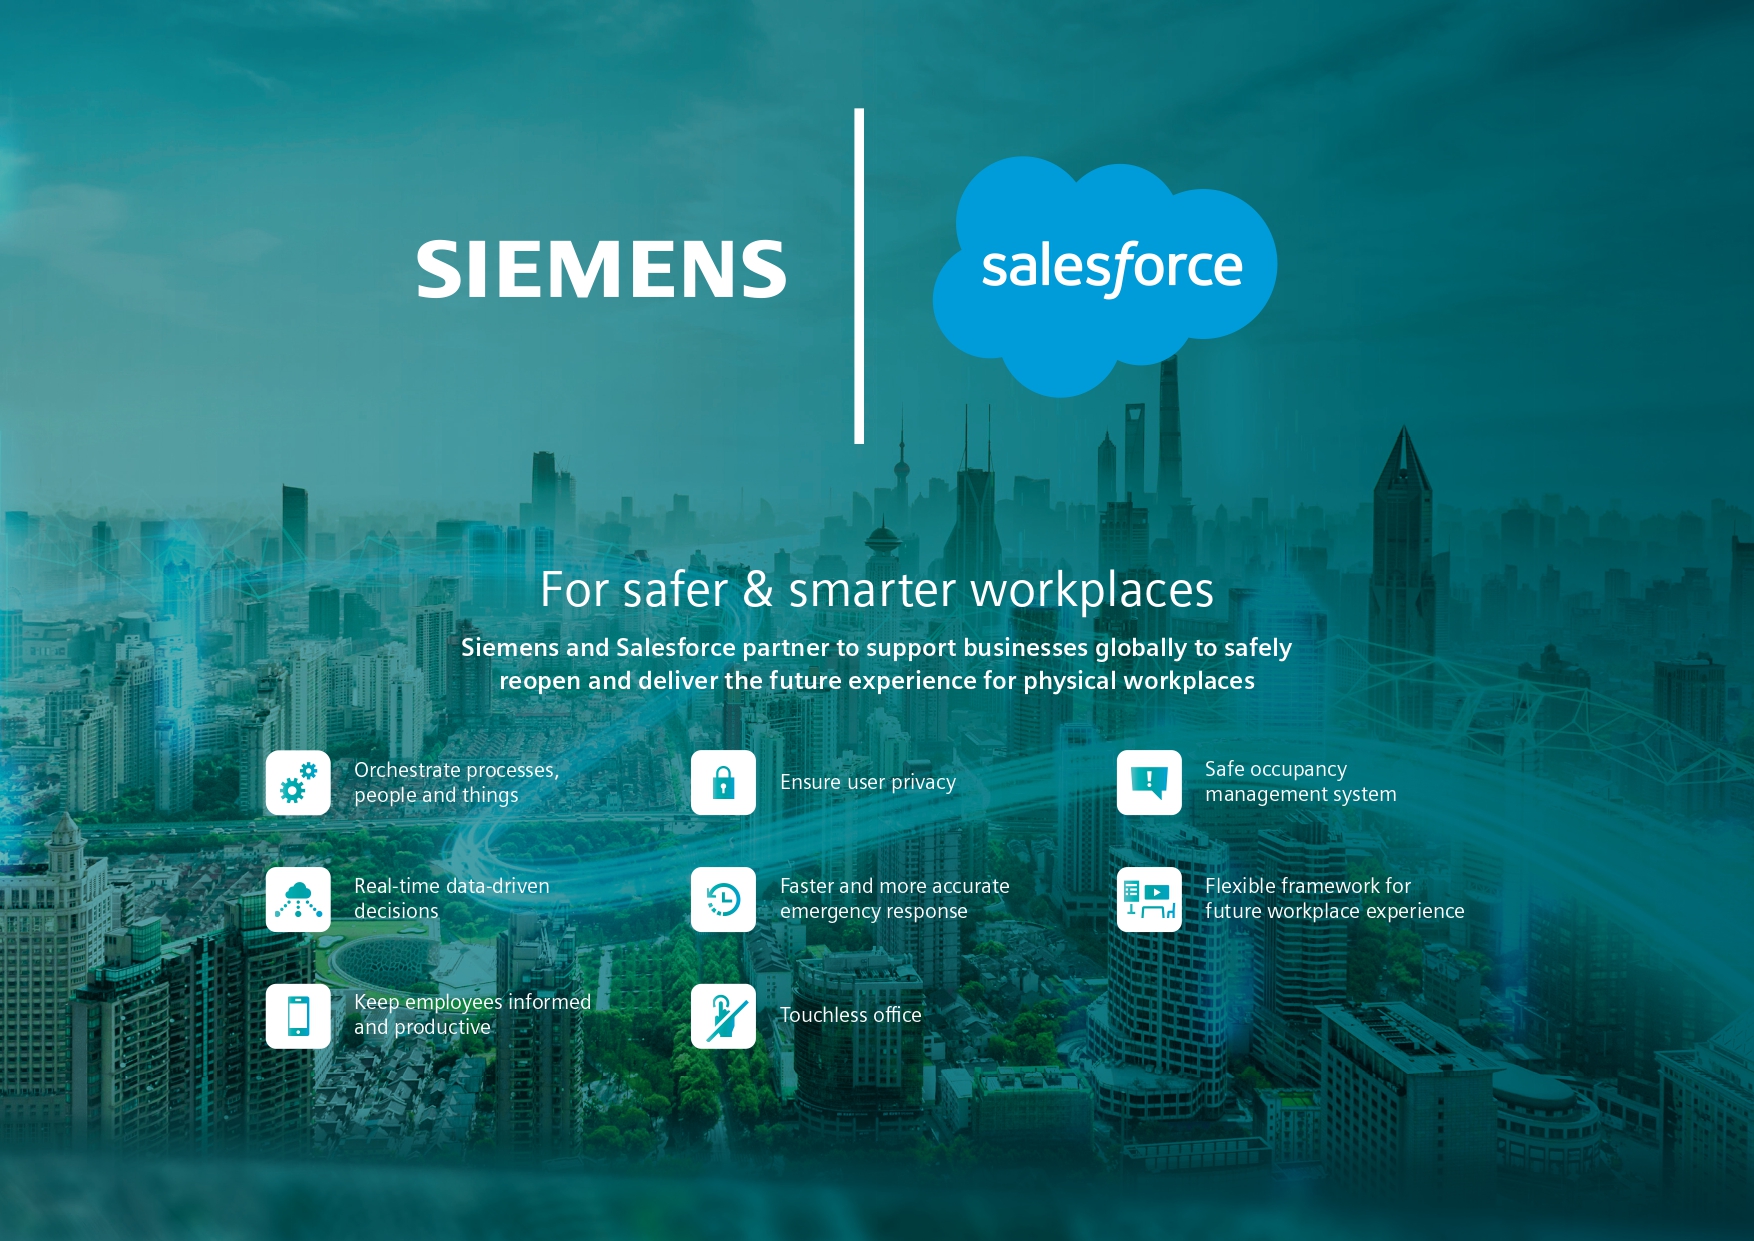 Image for Siemens And Salesforce Partner To Deliver The Future Experience For Safe Workplaces